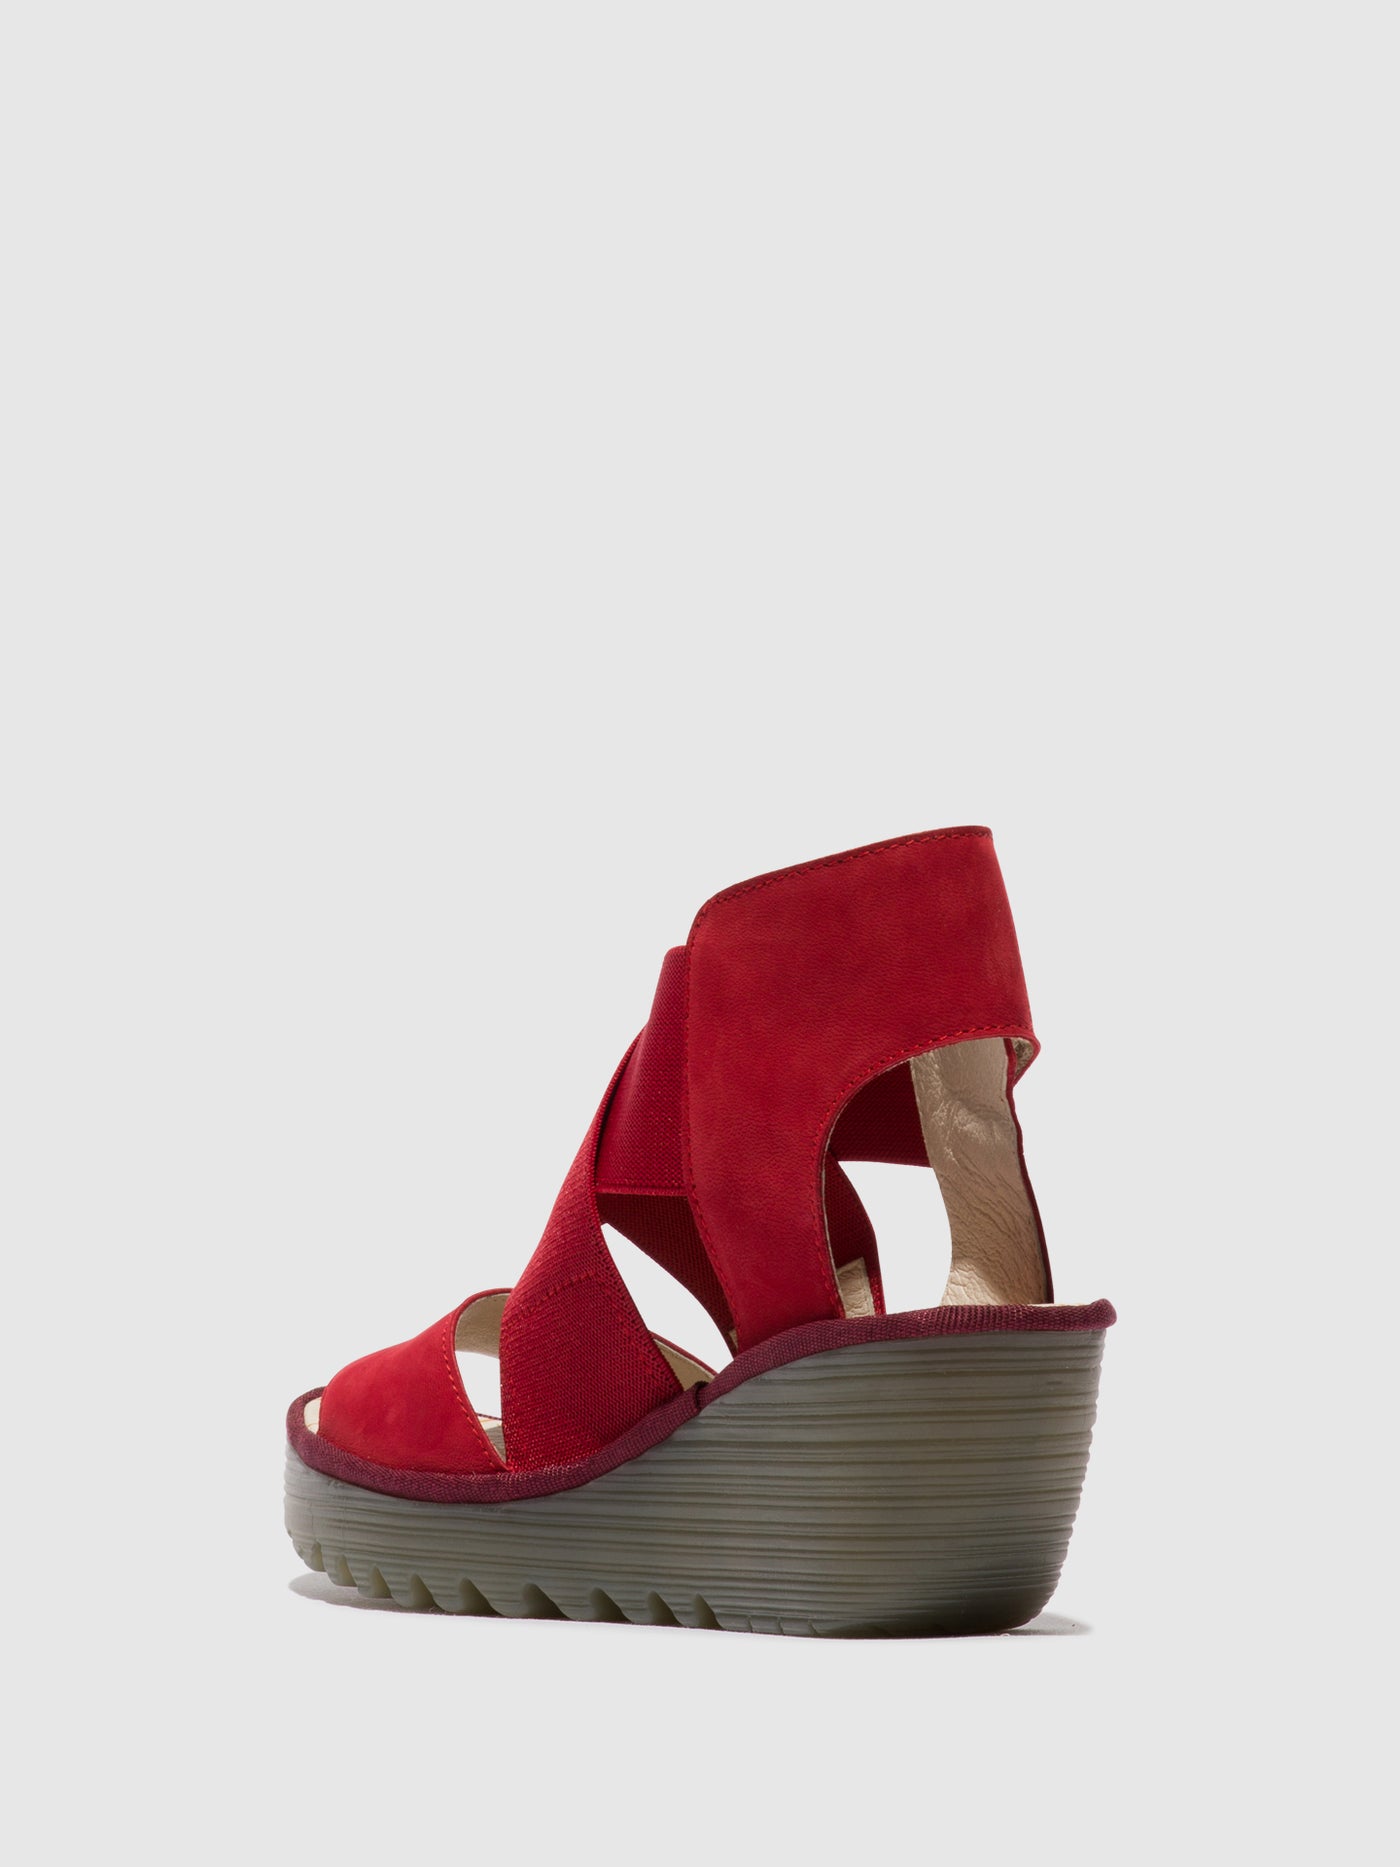 Crossover Sandals YUBA385FLY LIPSTICK RED